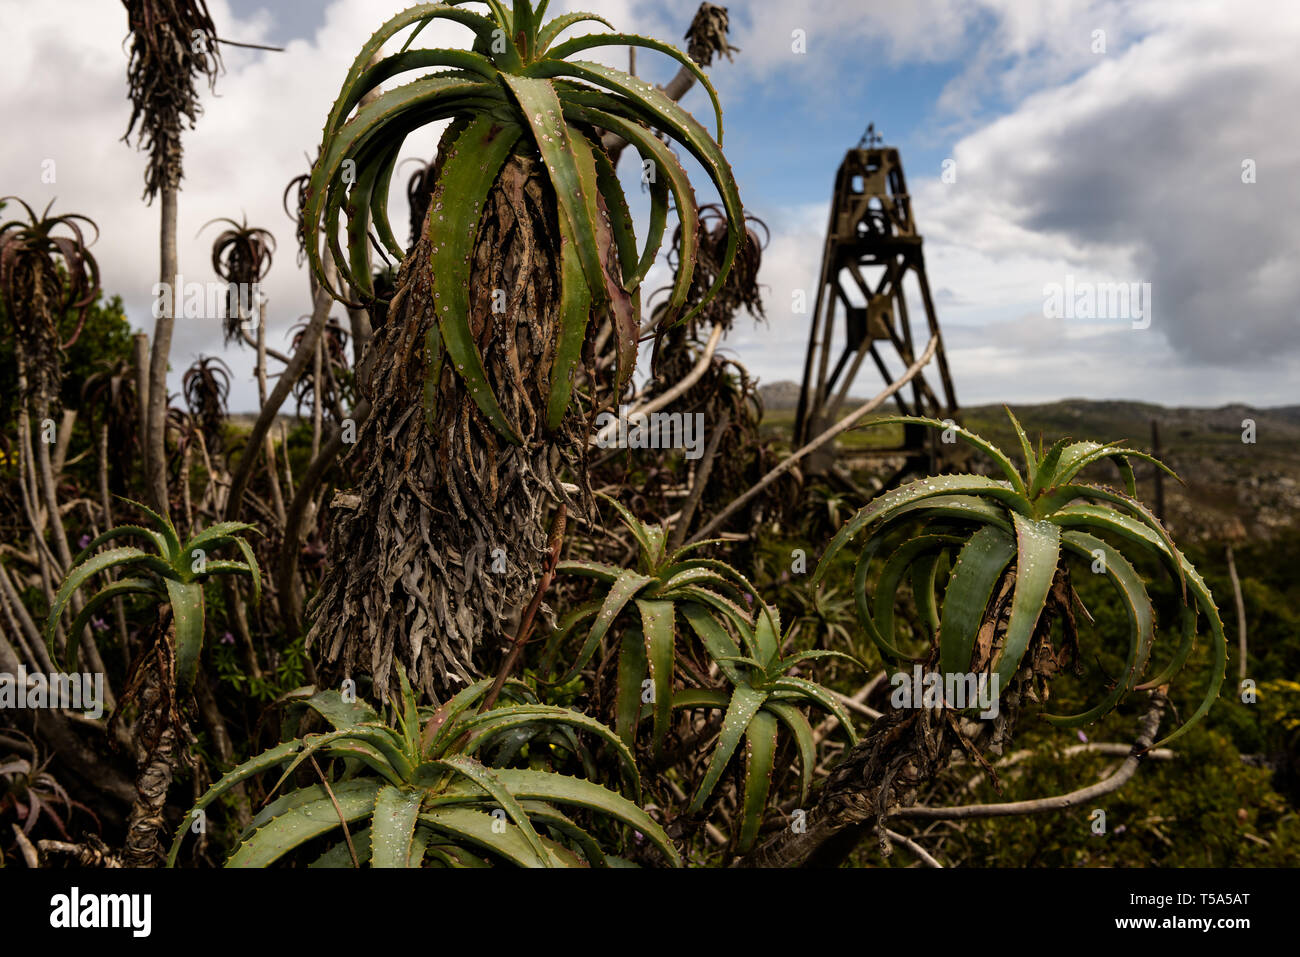 A Krantz aloe on the mountain slopes above the Simons Town naval base with a remnant of a cable way tower in South Africa's Western Cape province Stock Photo